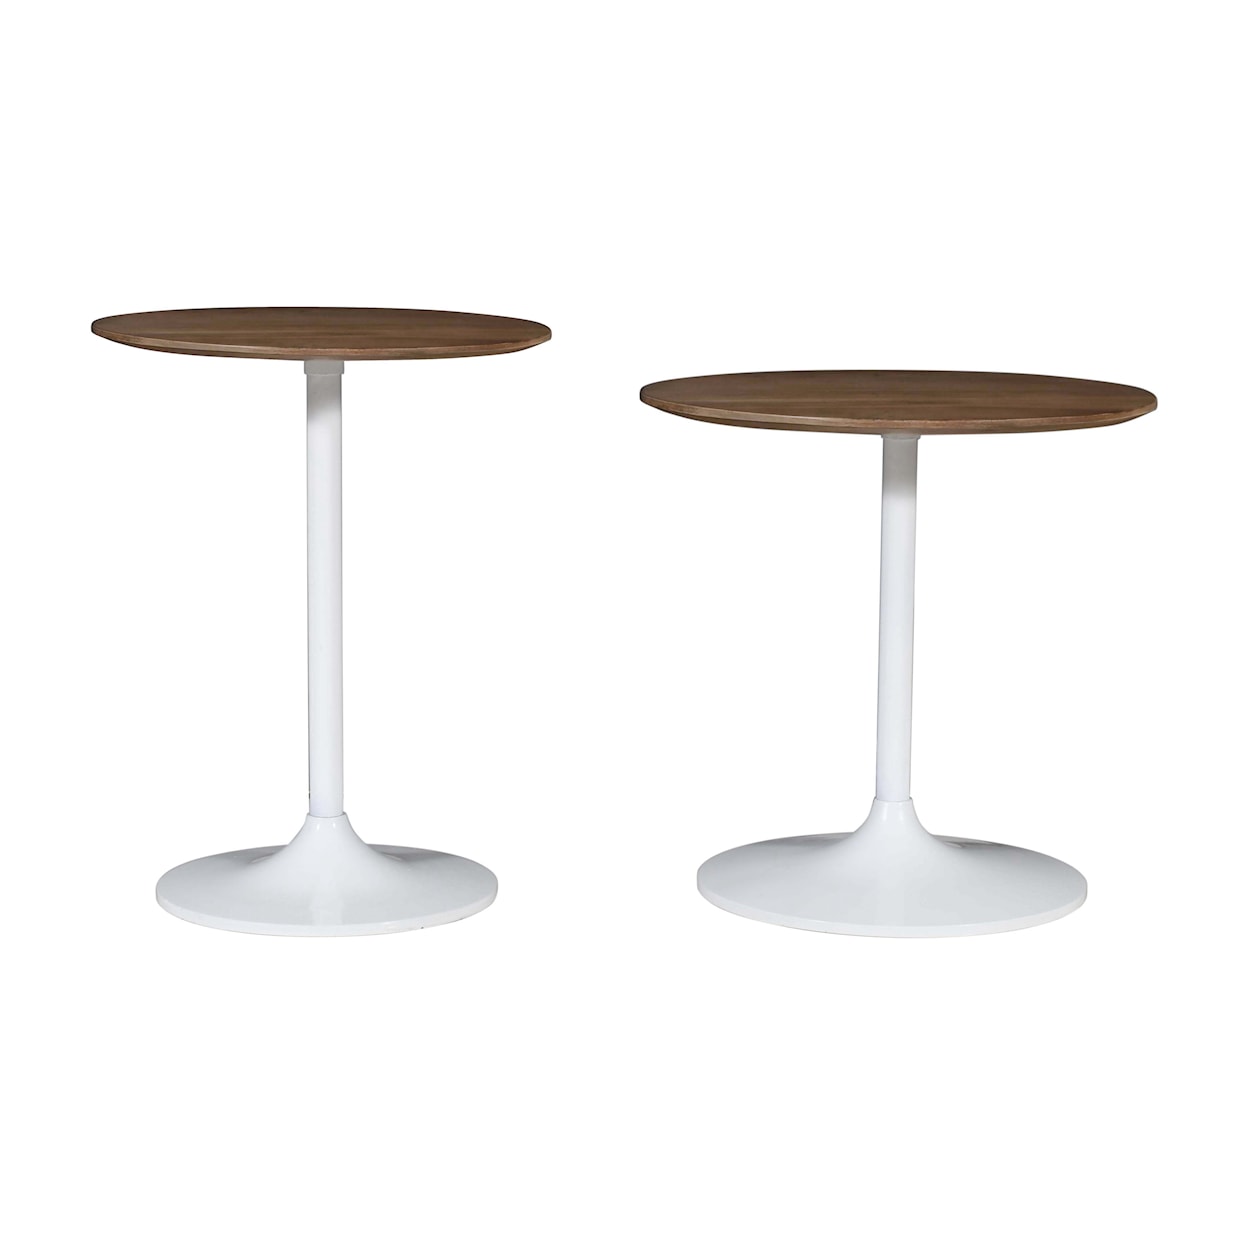 Jofran Remy Nesting Table - Set of 2 - White Two Tone